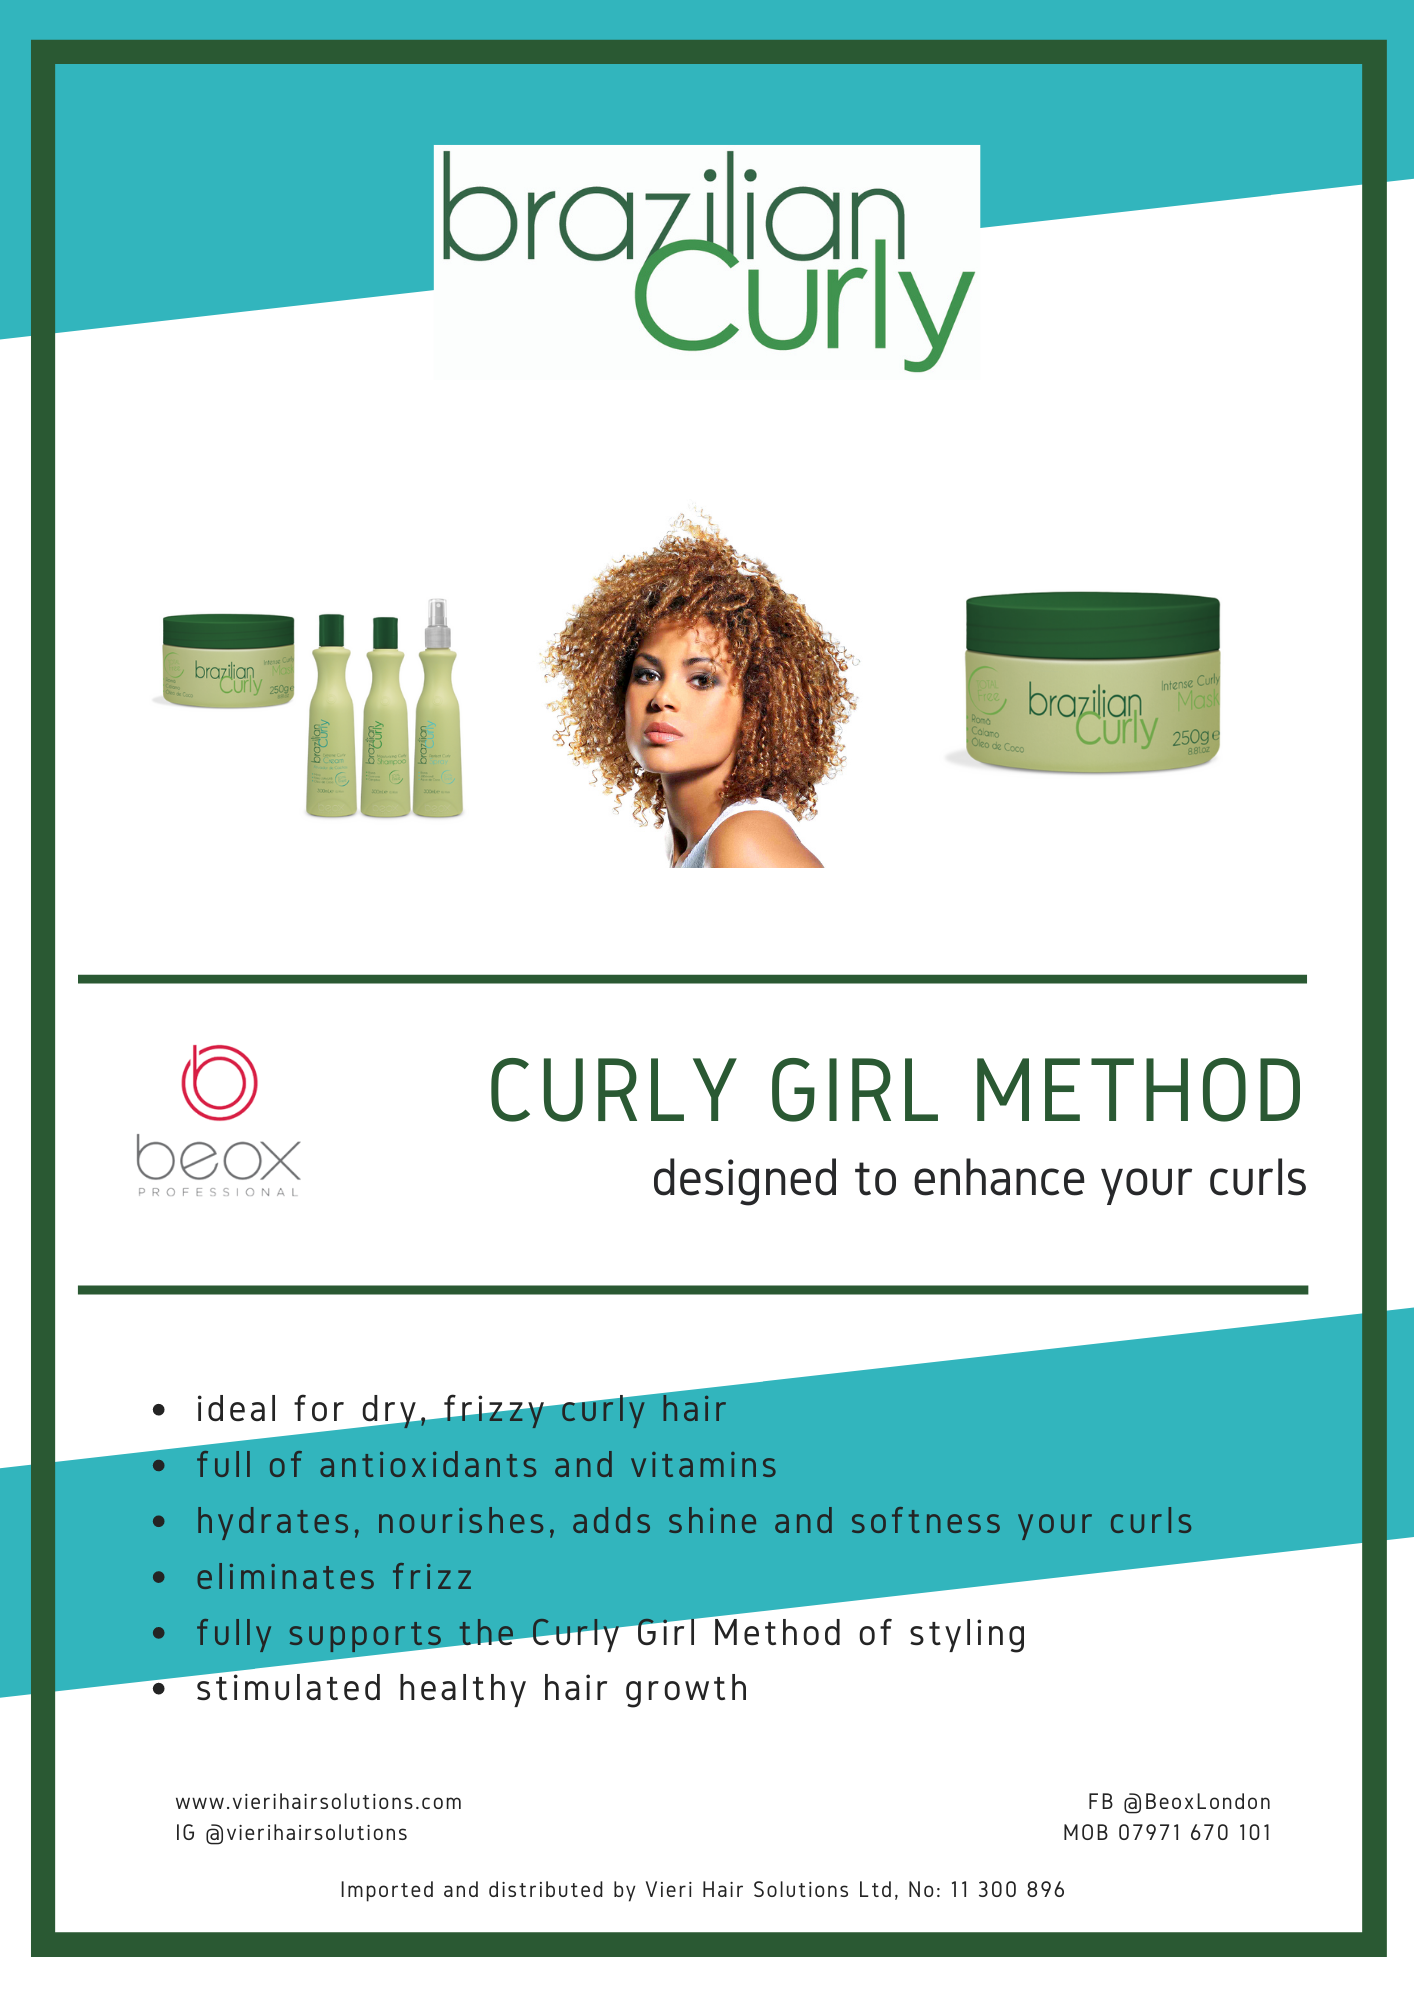 30 Brazilian Curly Aftercare Manual Front